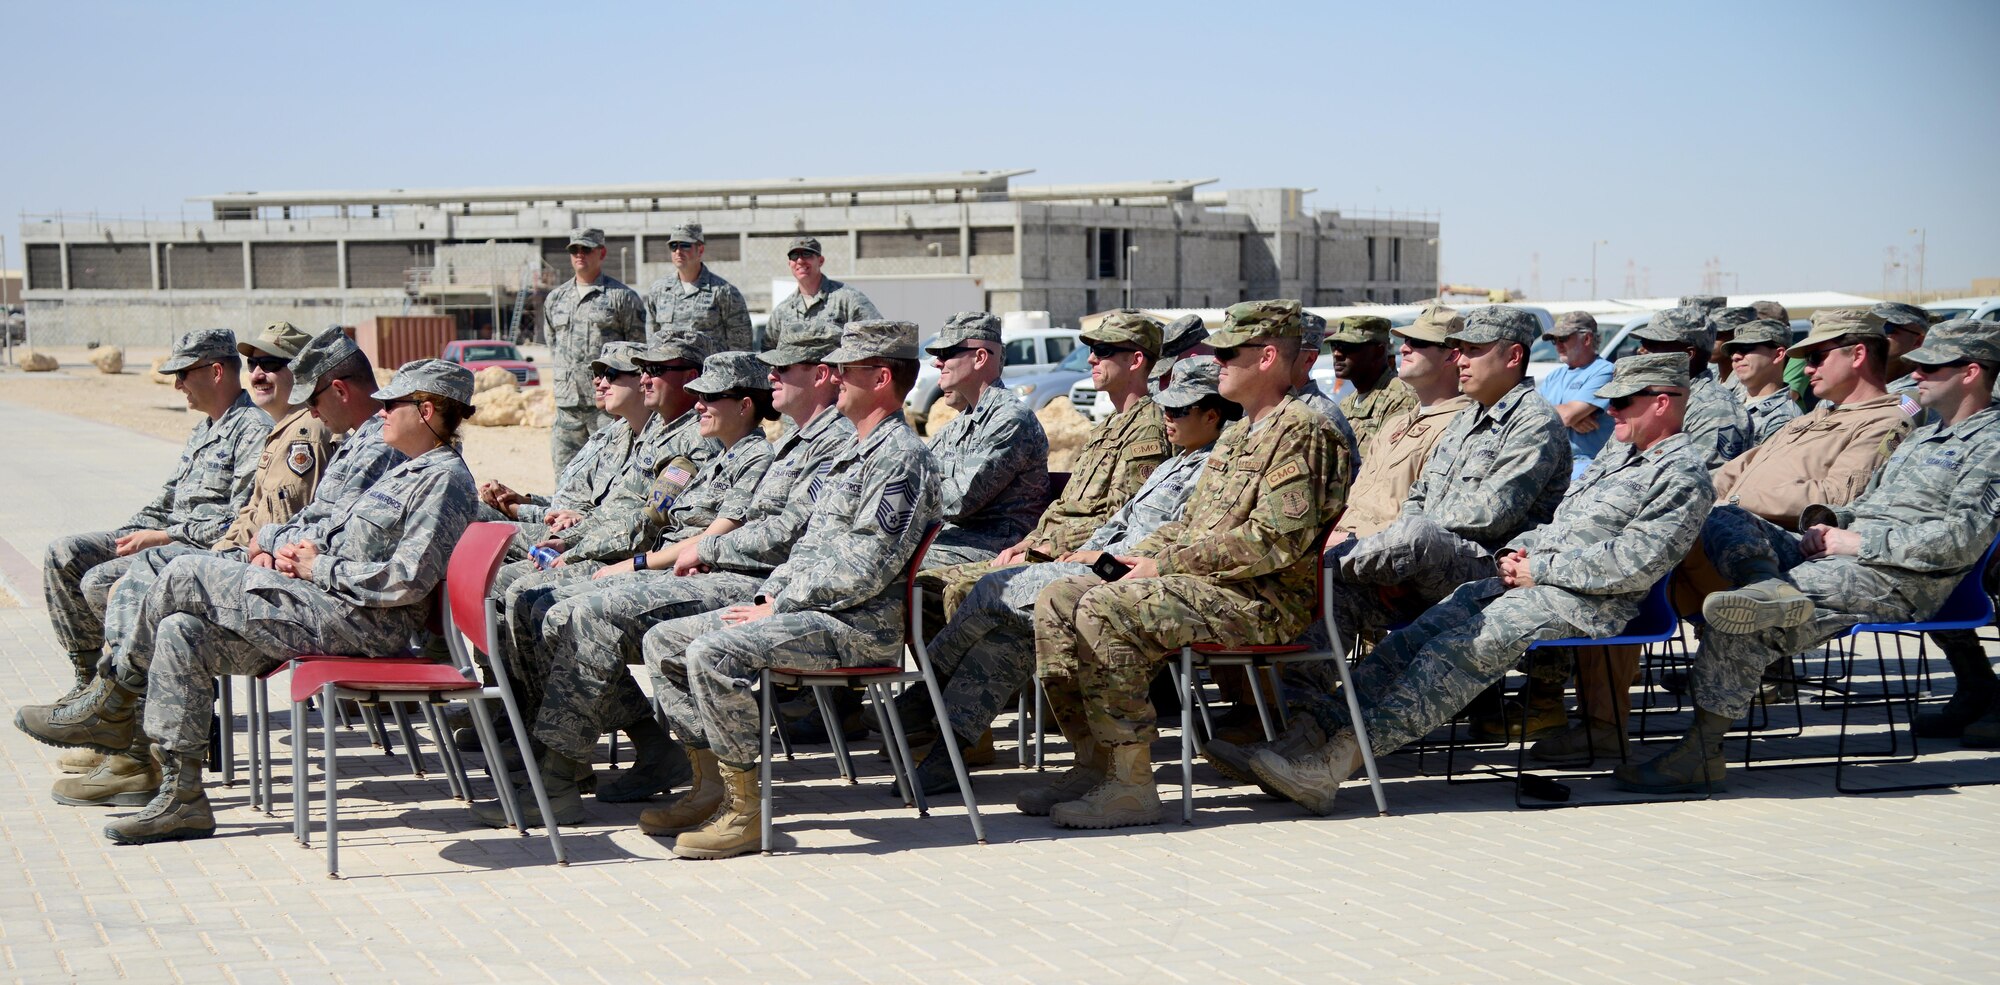 Attendees of the Blatchford-Preston Complex Phase II linen cutting ceremony listen to remarks before the grand opening of the new dormitories, April 3, 2015, at Al Udeid Air Base, Qatar. The opening of the BPC Phase II dormitories will make room for over 700 noncommissioned officers here at Al Udeid. (U.S. Air Force photo by Senior Airman Kia Atkins)